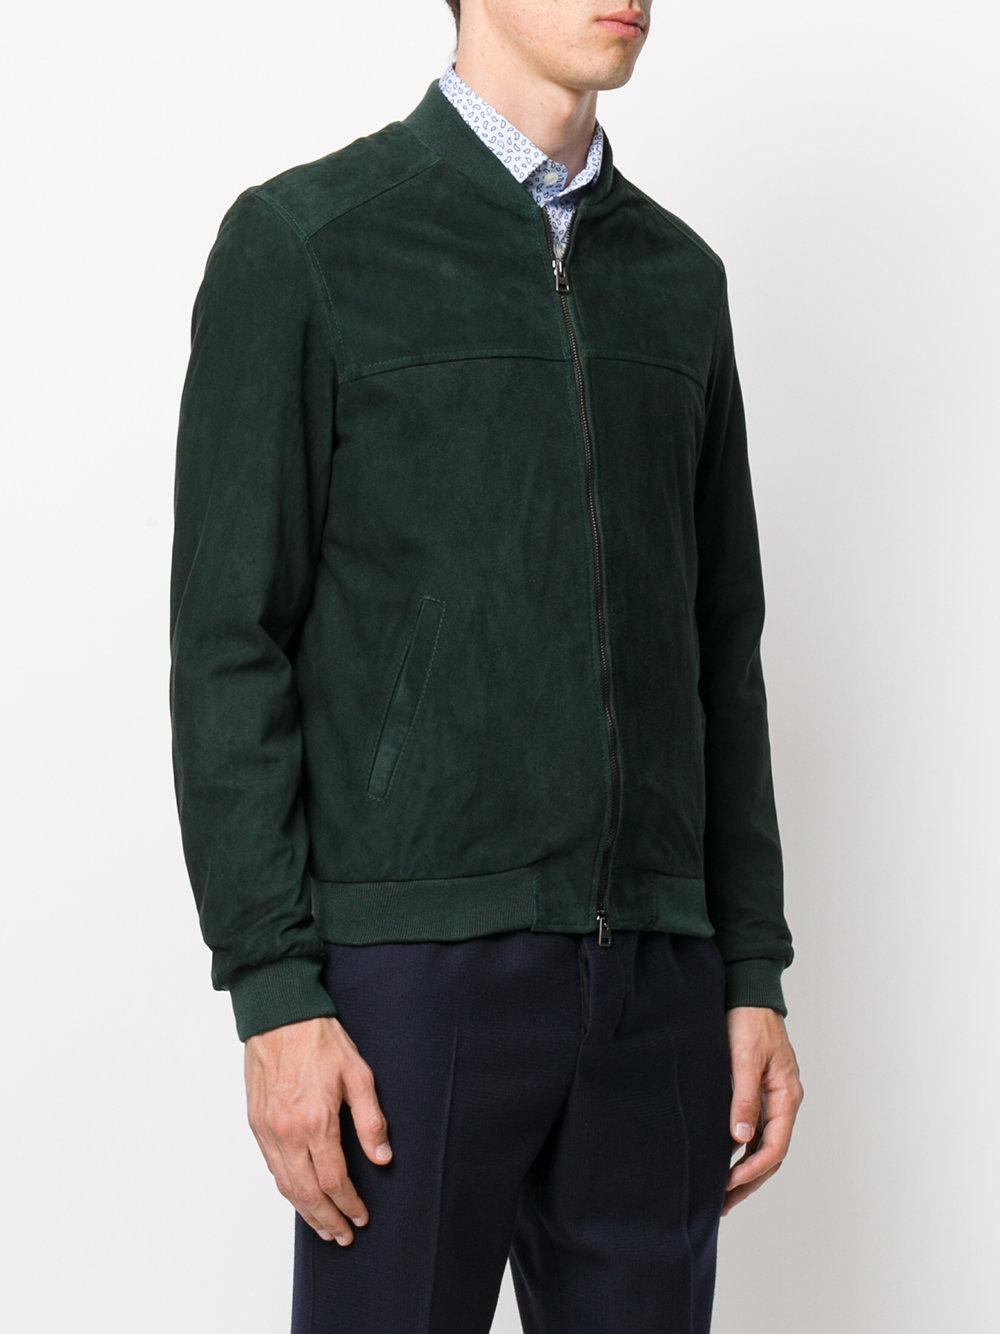 Lyst - Etro Classic Bomber Jacket in Green for Men